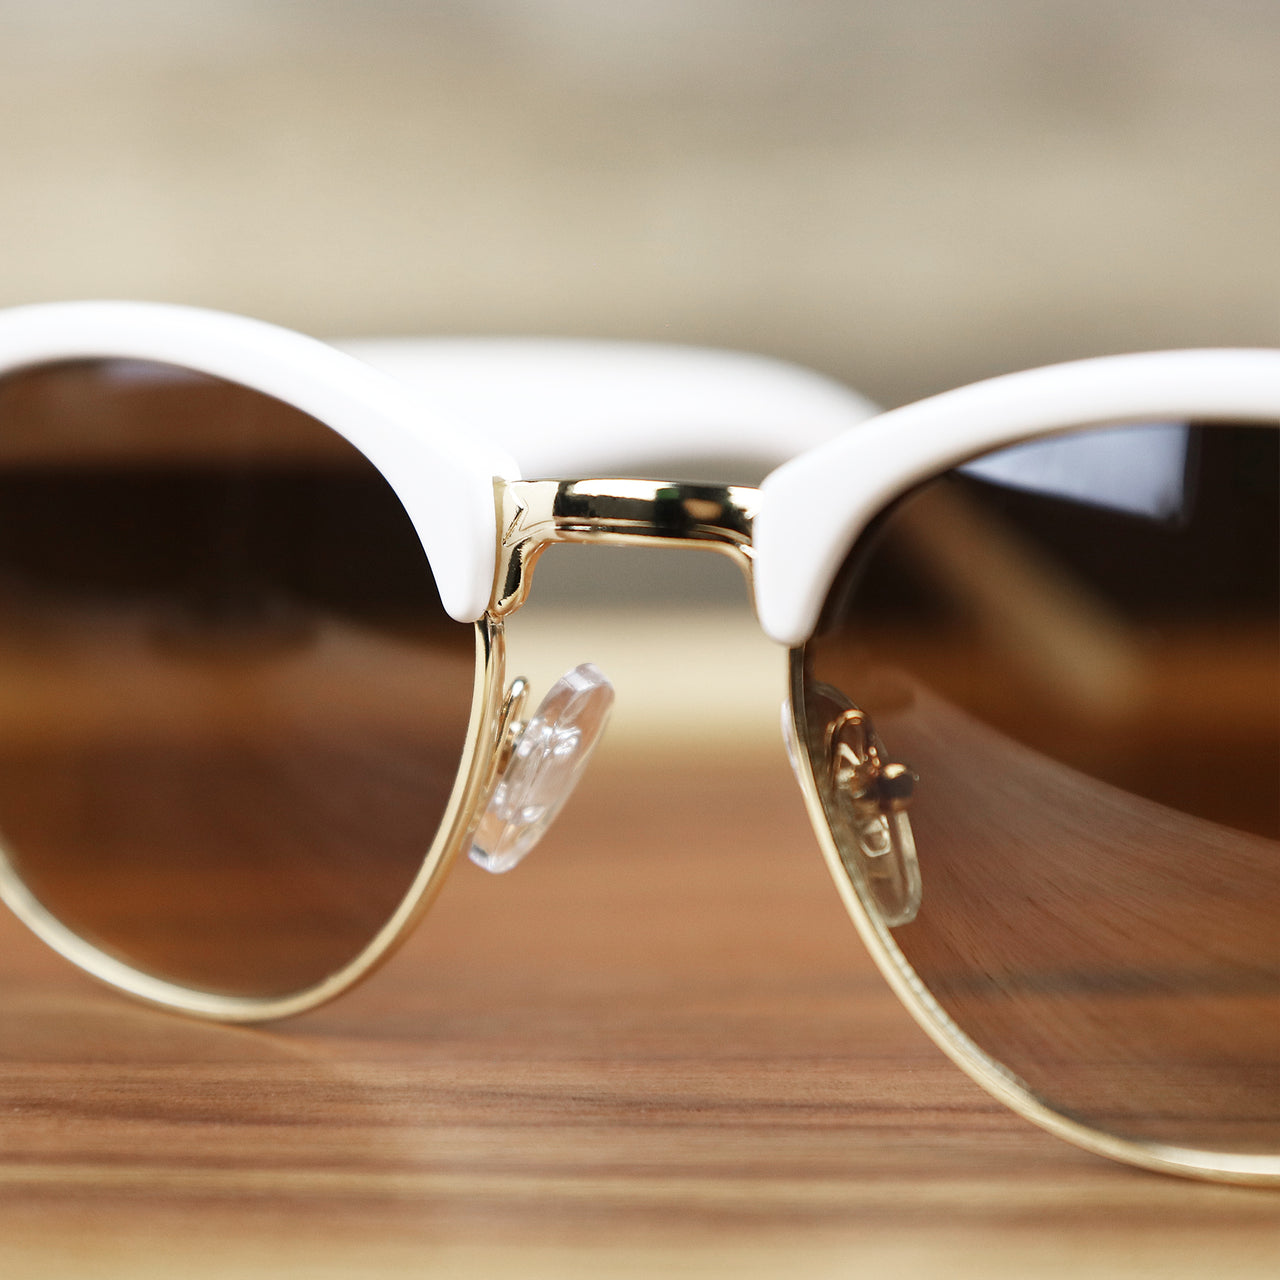 The bridge on the Round Frame Brown Gradient Lens Sunglasses with White Gold Frame